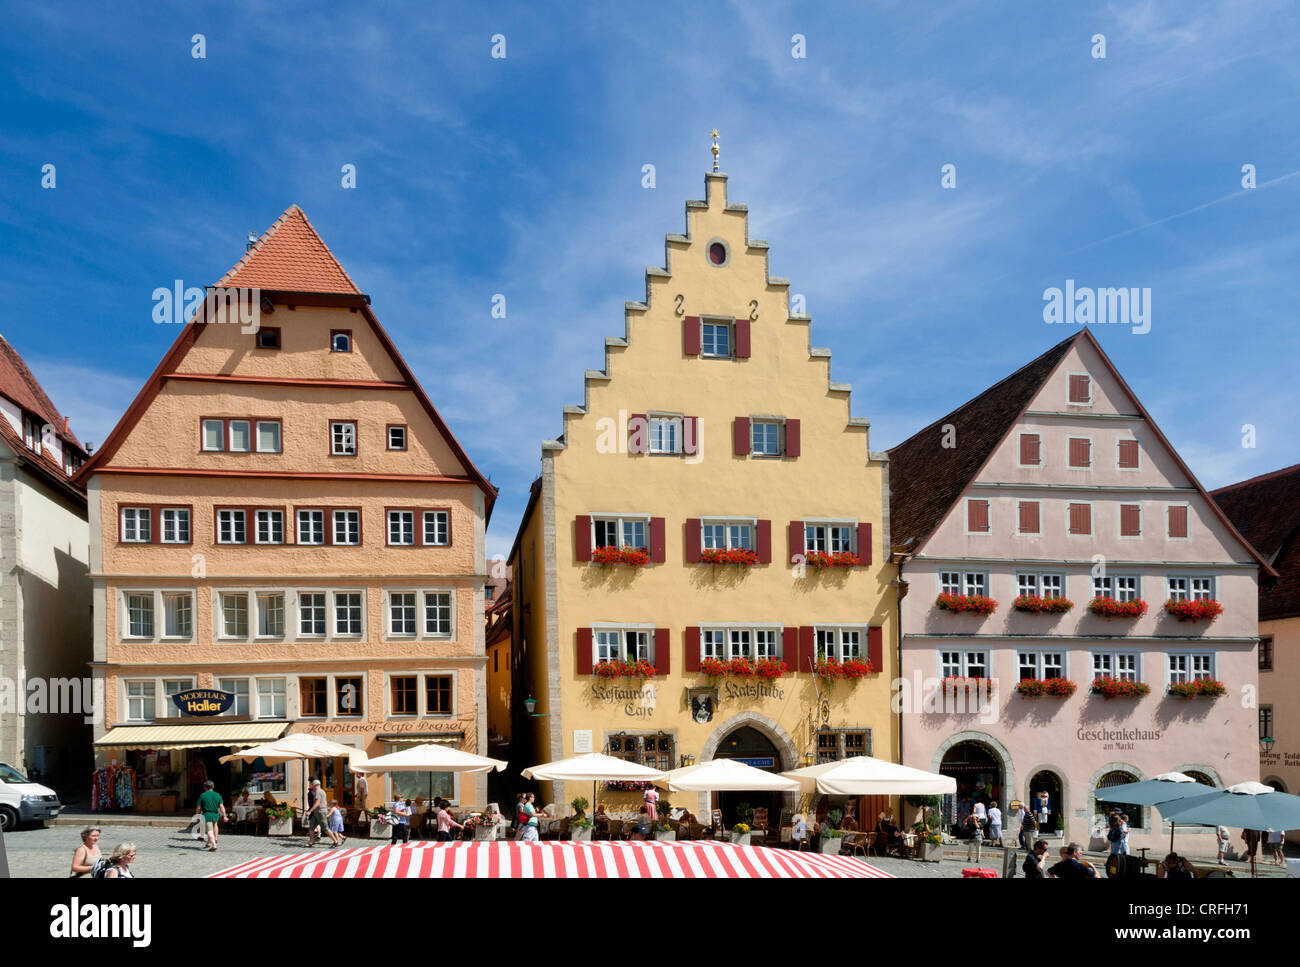 In the main square in Rothenburg ob der Tauber, Ansbach, Franconia, Germany Stock Photo